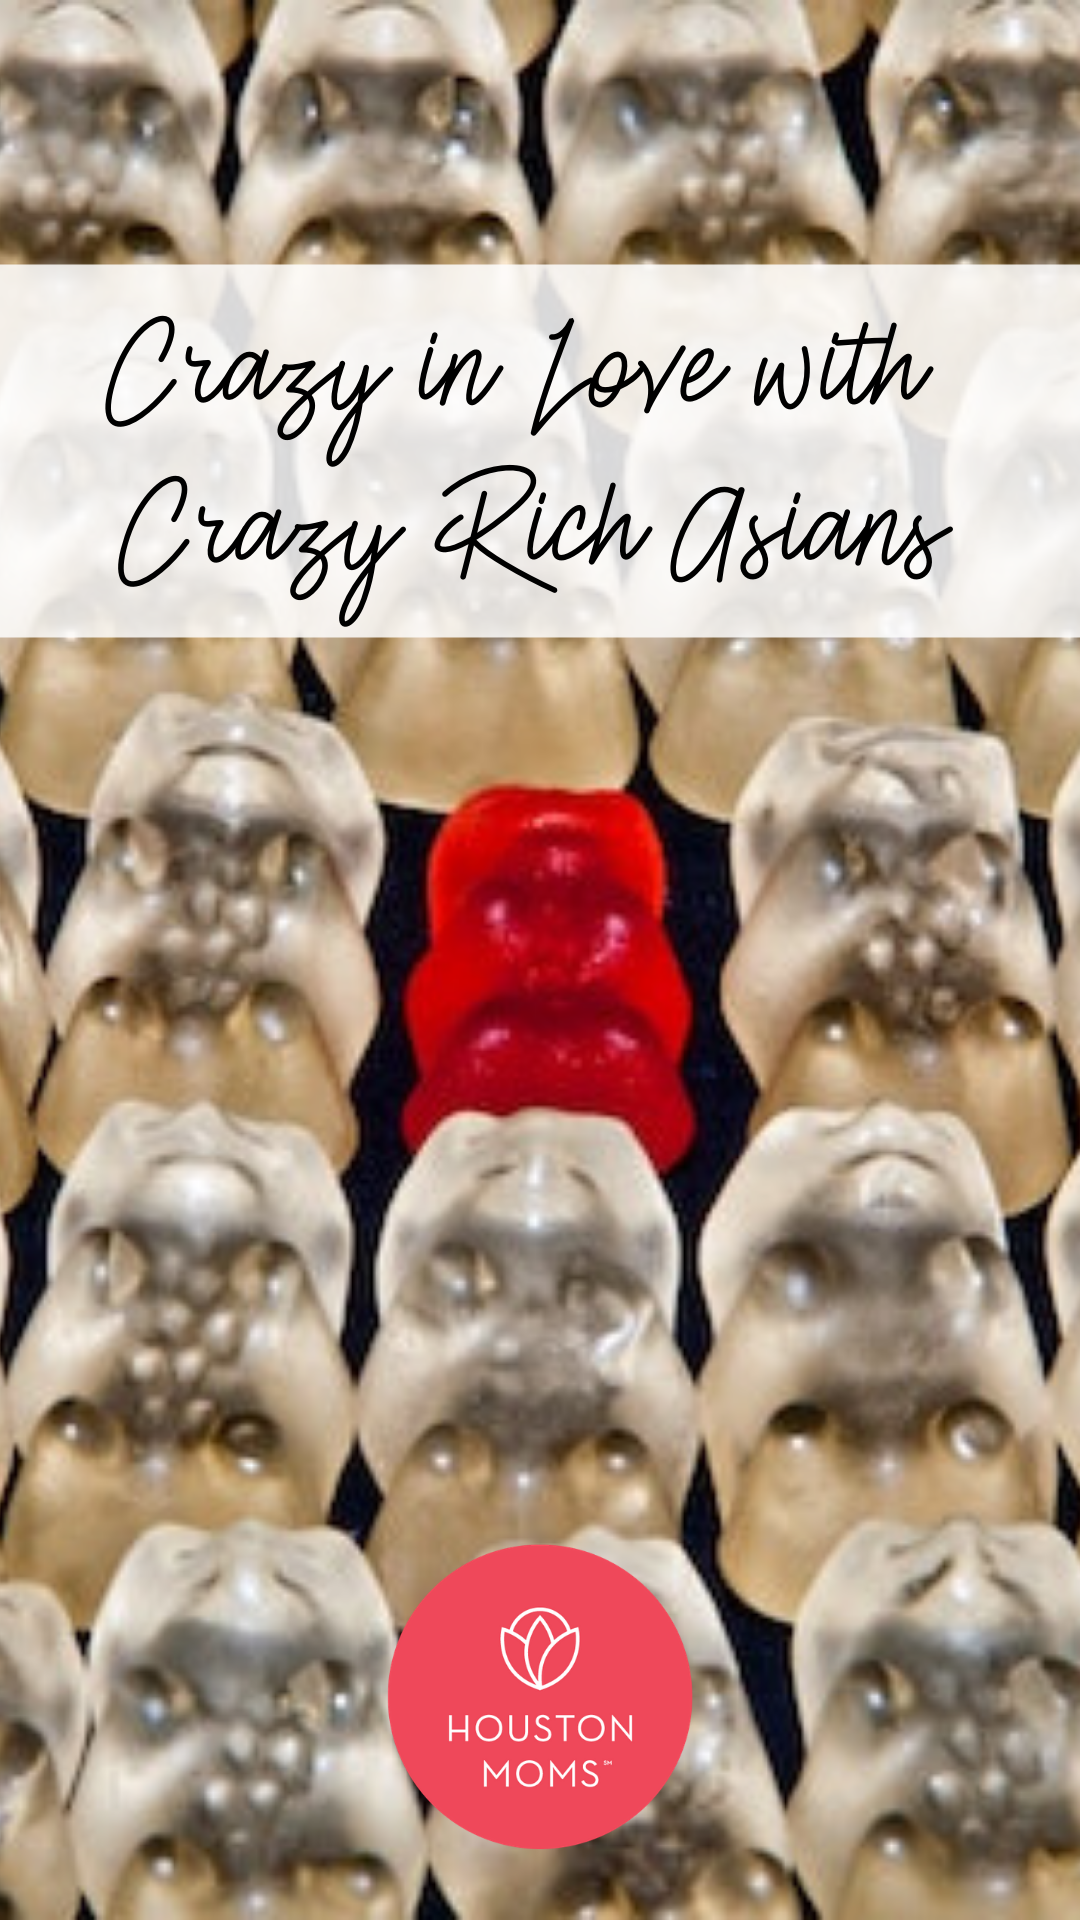 Houston Moms "Crazy in Love with Crazy Rich Asians" #houstonmoms #houstonmomsblog #momsaroundhouston